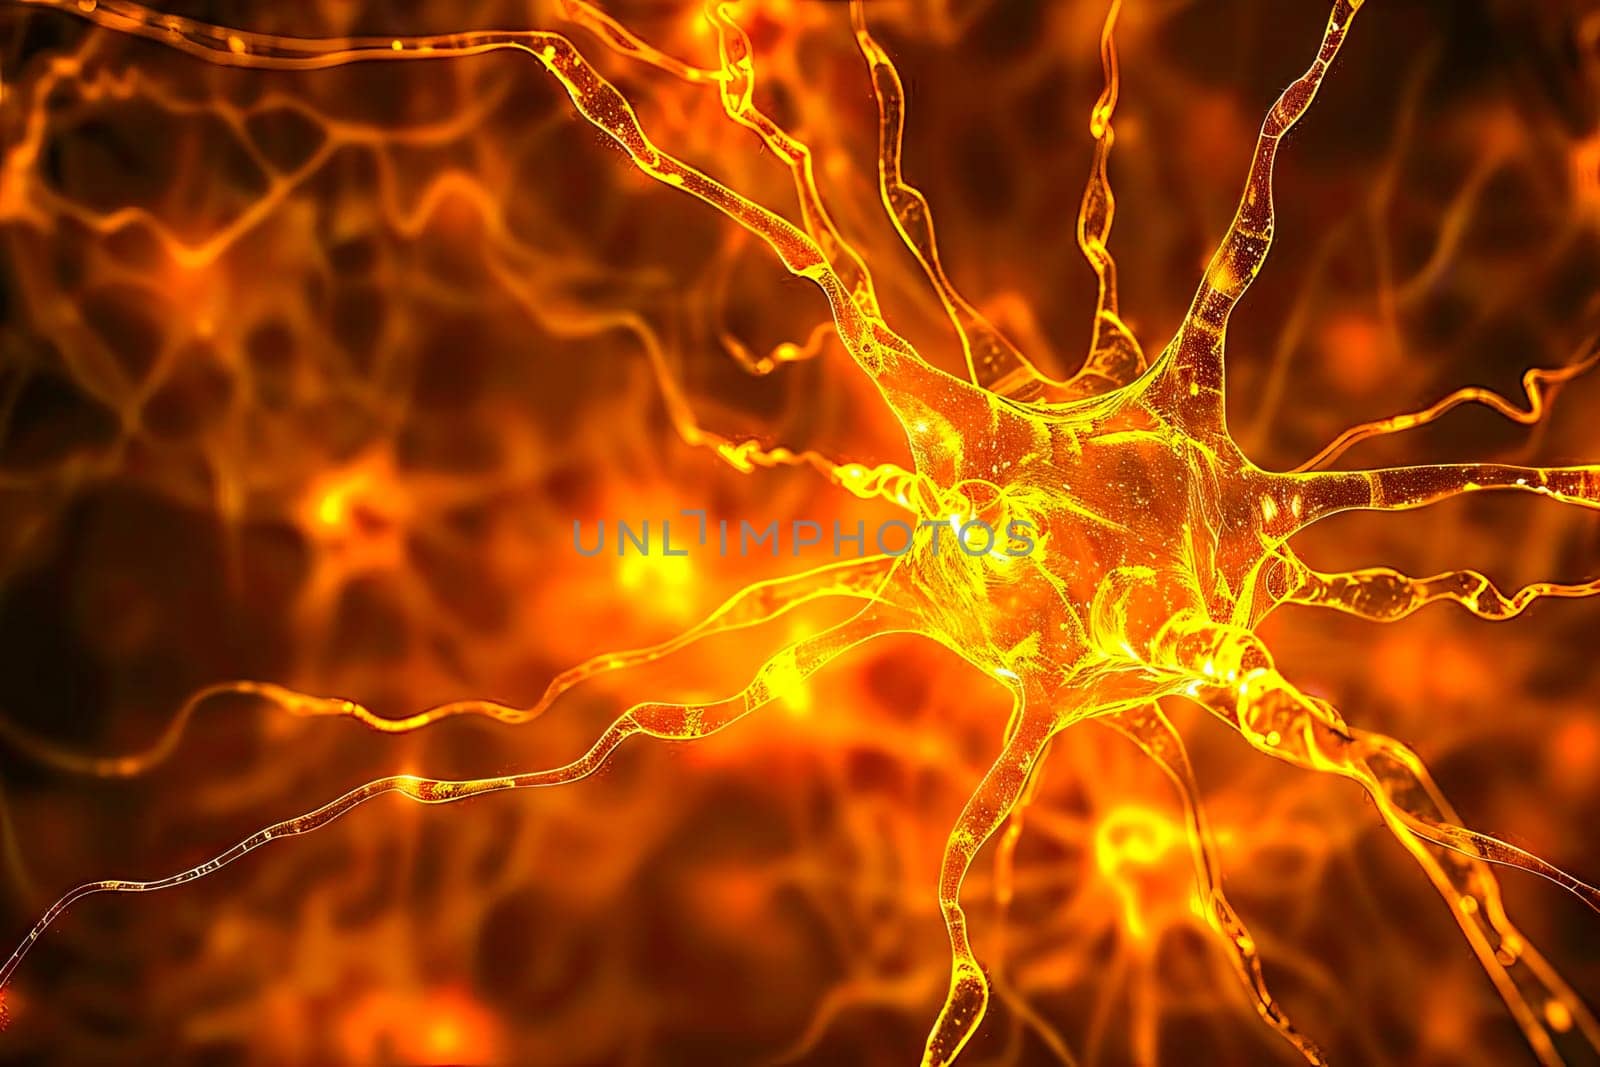 Close-up of active neurons in the brain, illustrating synaptic activity by vladimka